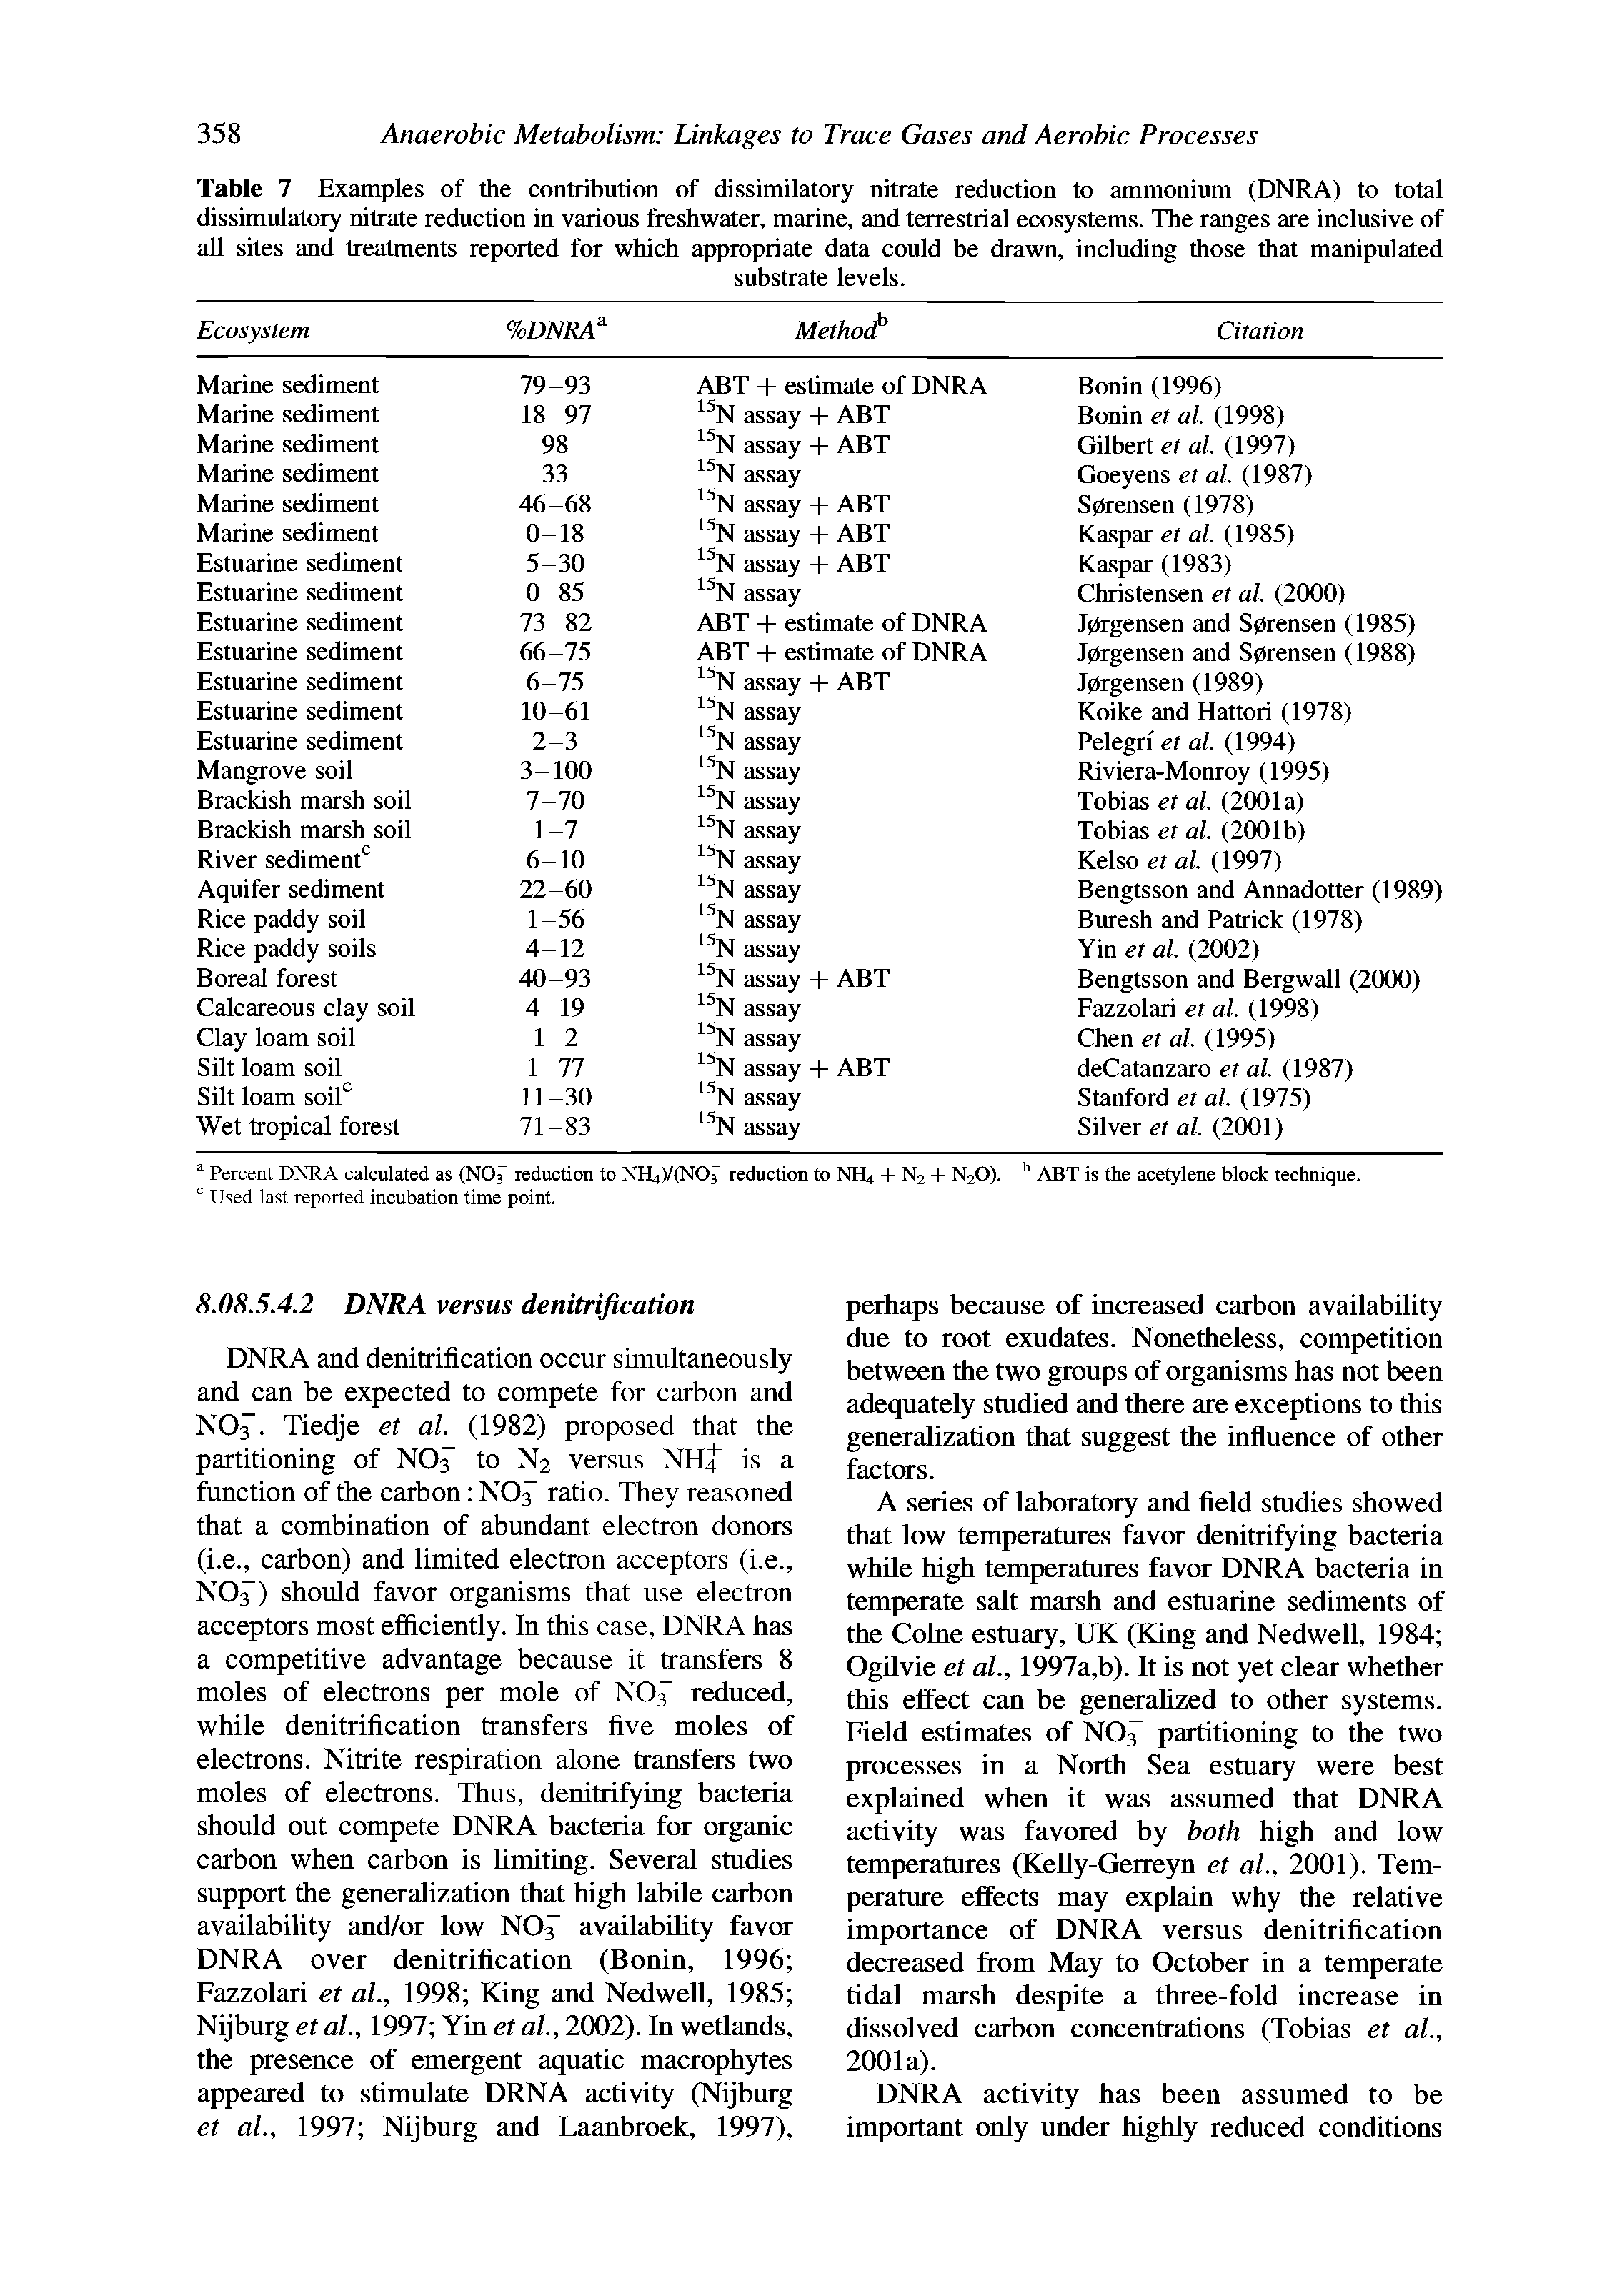 Table 7 Examples of the contribution of dissimilatory nitrate reduction to ammonium (DNRA) to total dissimulatory nitrate reduction in various freshwater, marine, and terrestrial ecosystems. The ranges are inclusive of aU sites and treatments reported for which appropriate data could be drawn, including those that manipulated...